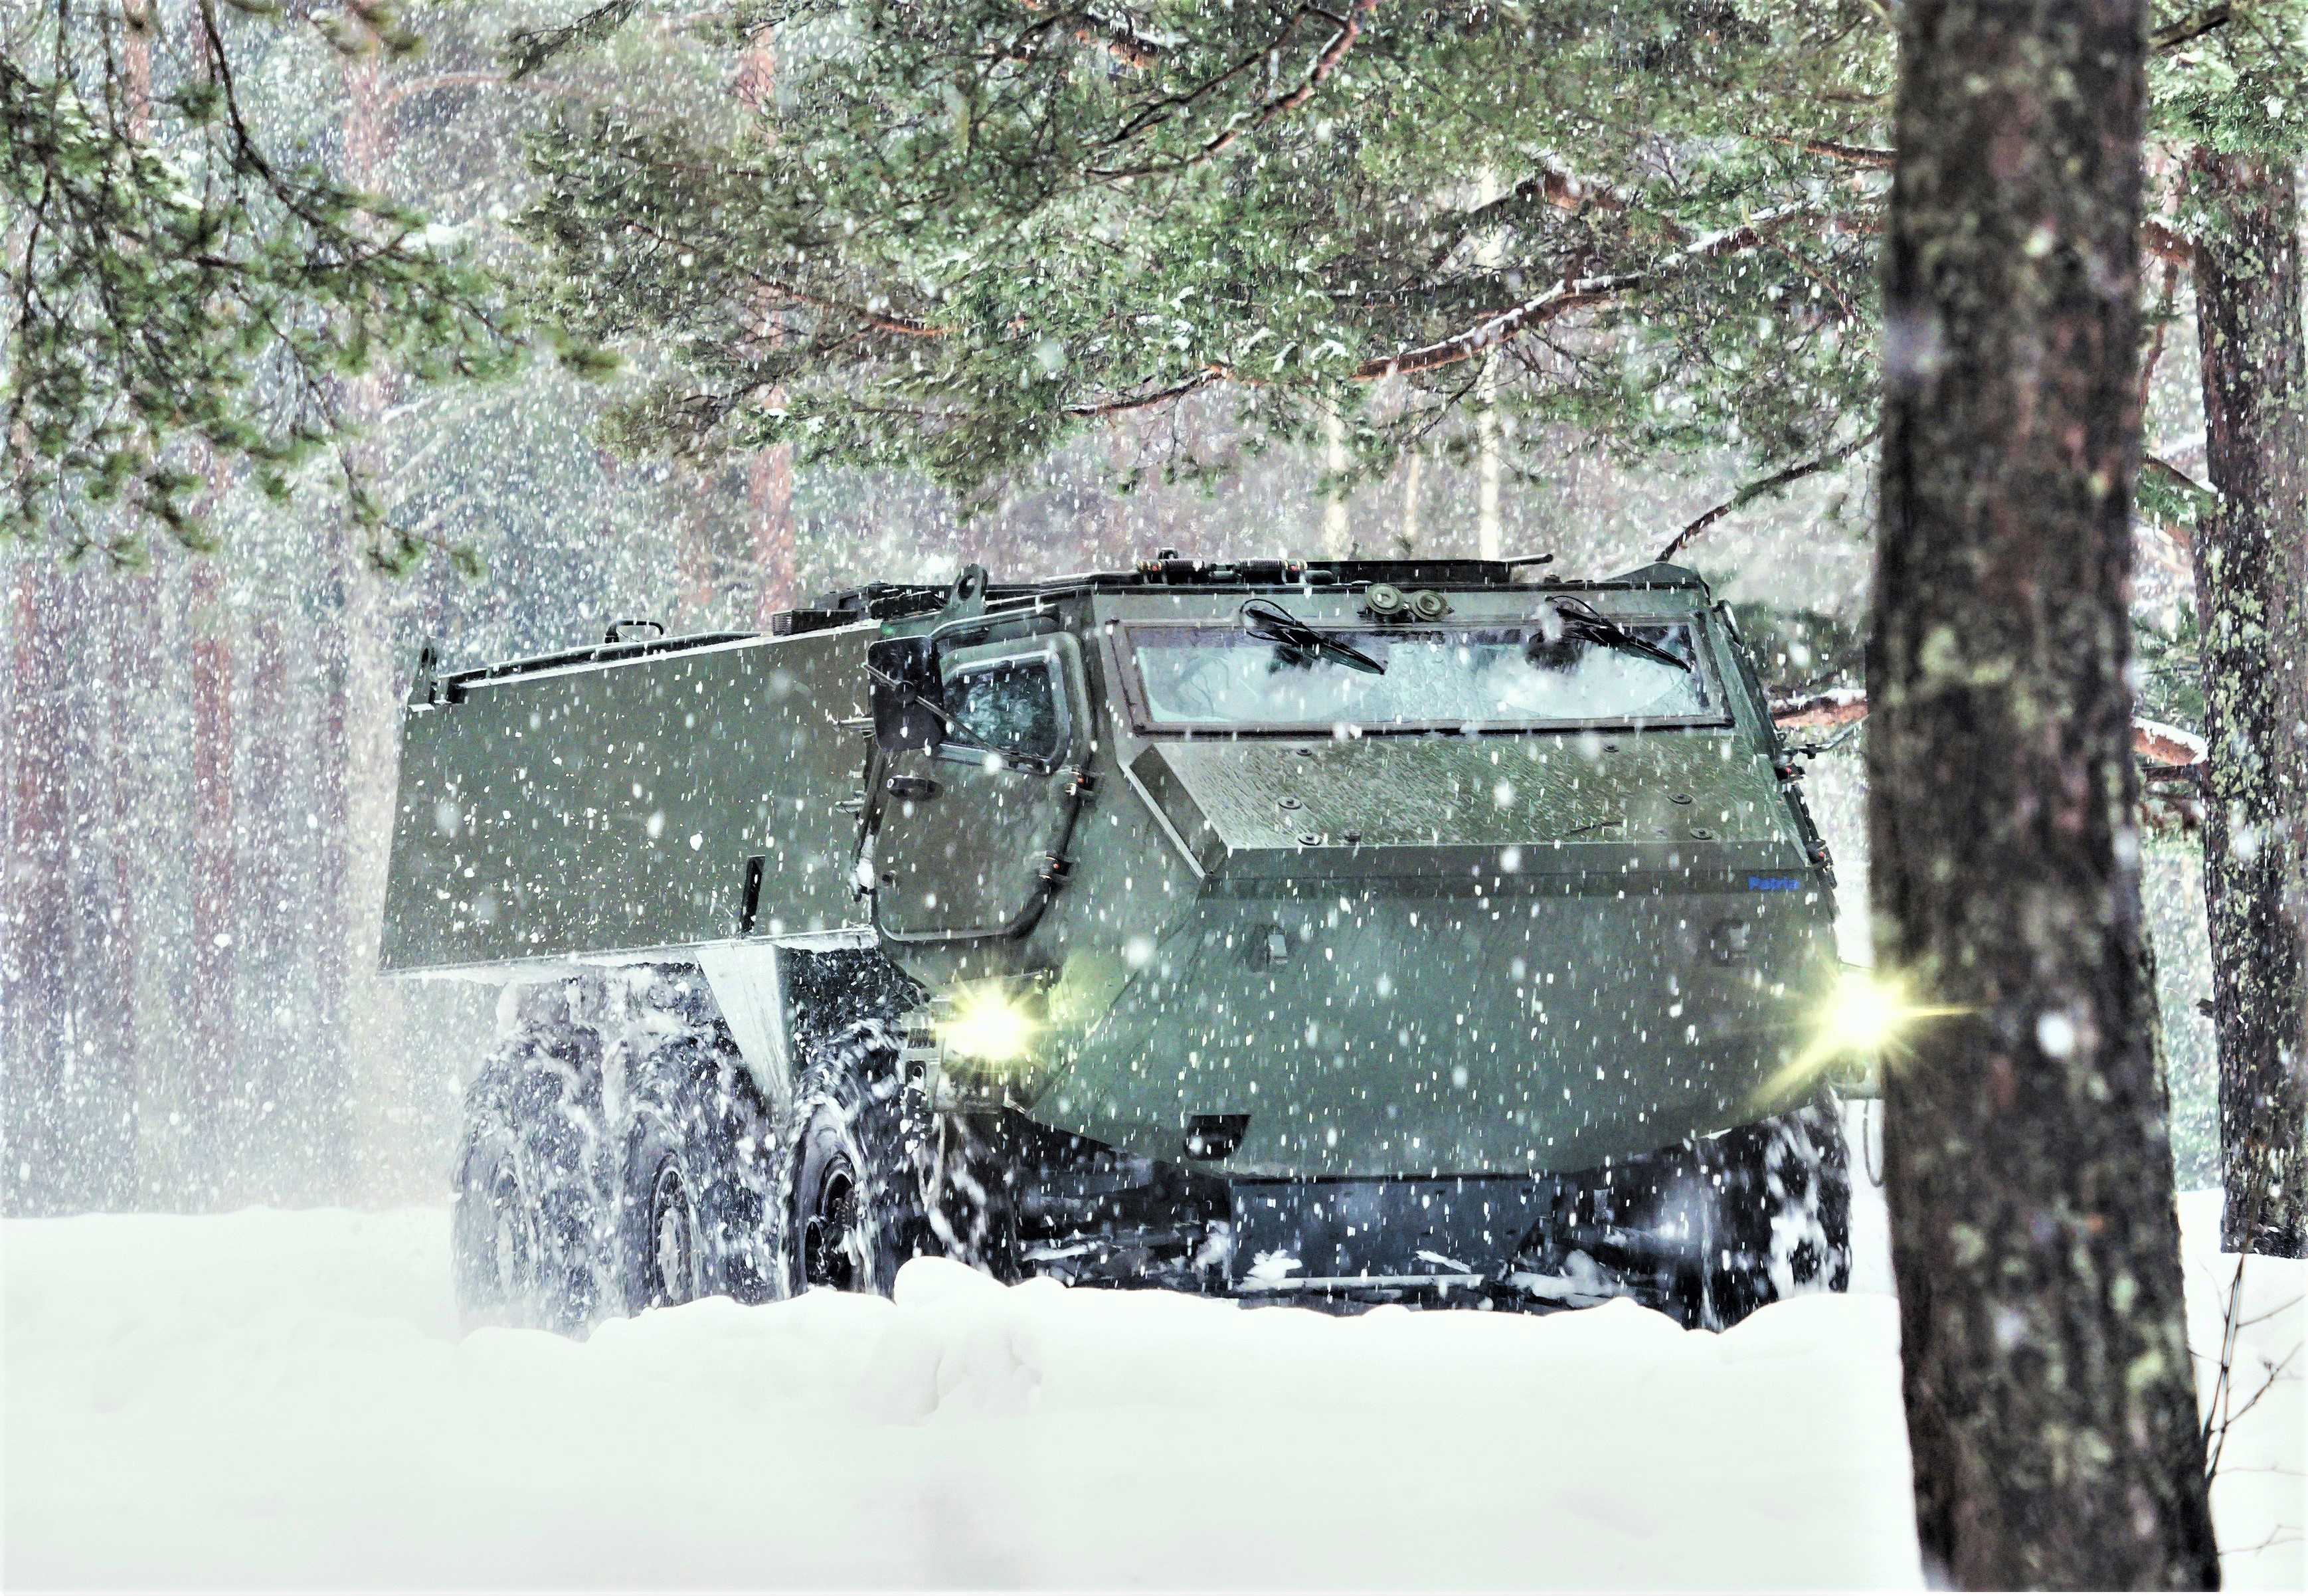 Patria Military vehicle during winter.